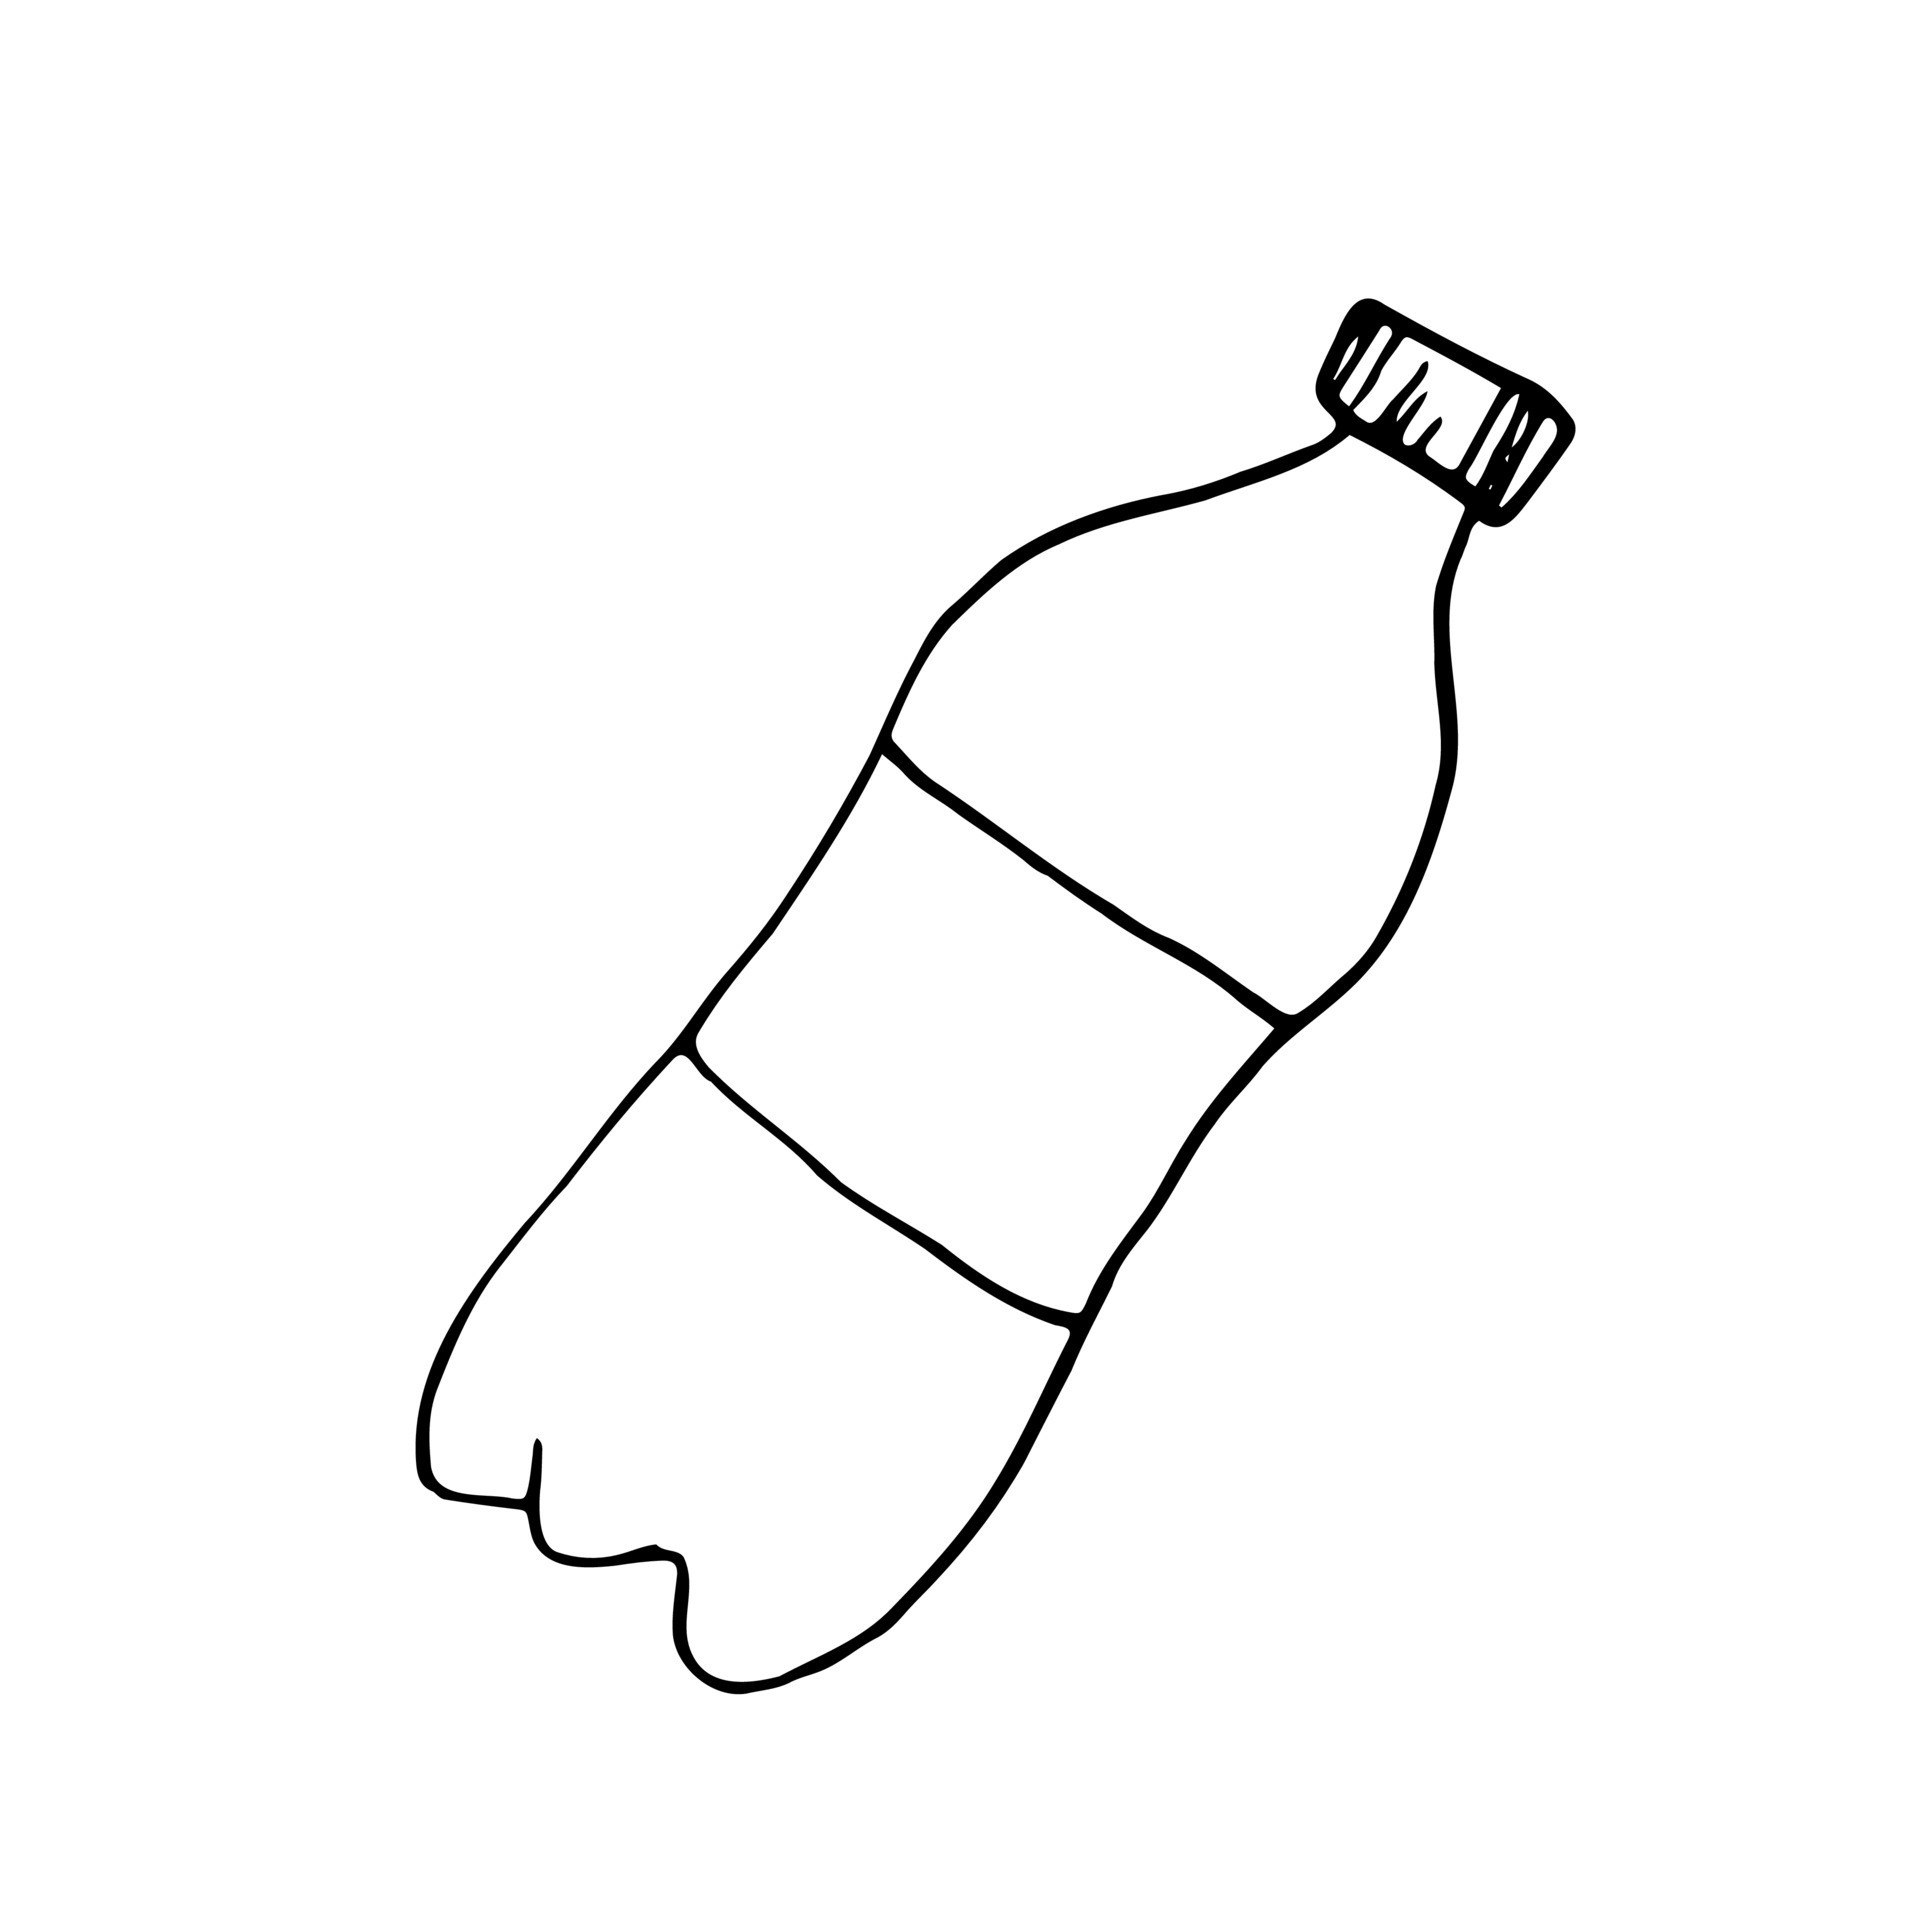 How To Write On Plastic Water Bottle 6 Easy Steps